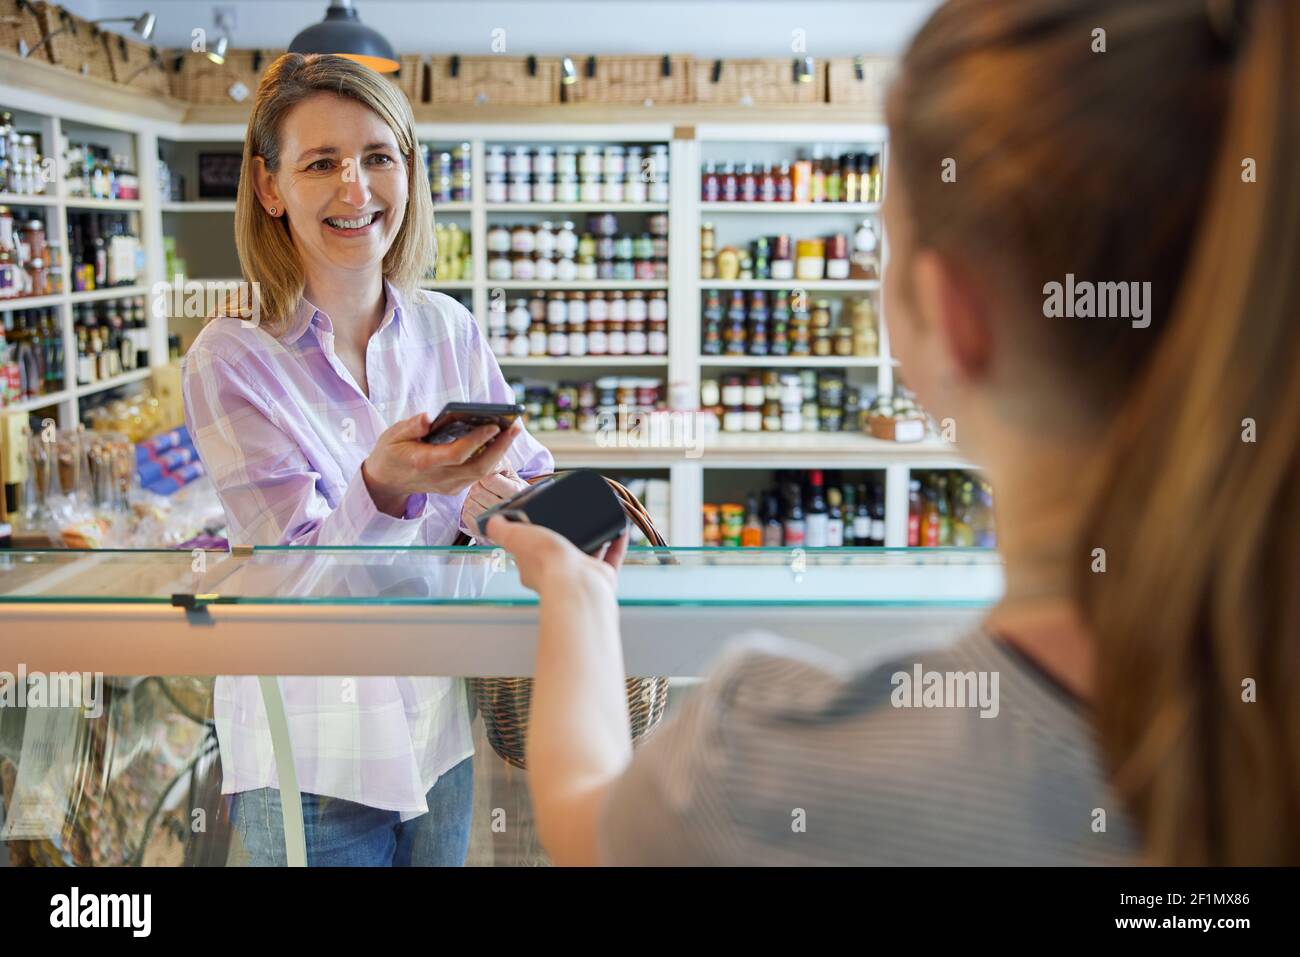 Smiling Female Customer Delicatessen Food Store Making Contactless Payment With Mobile Phone For Shopping To Sales Assistant Stock Photo